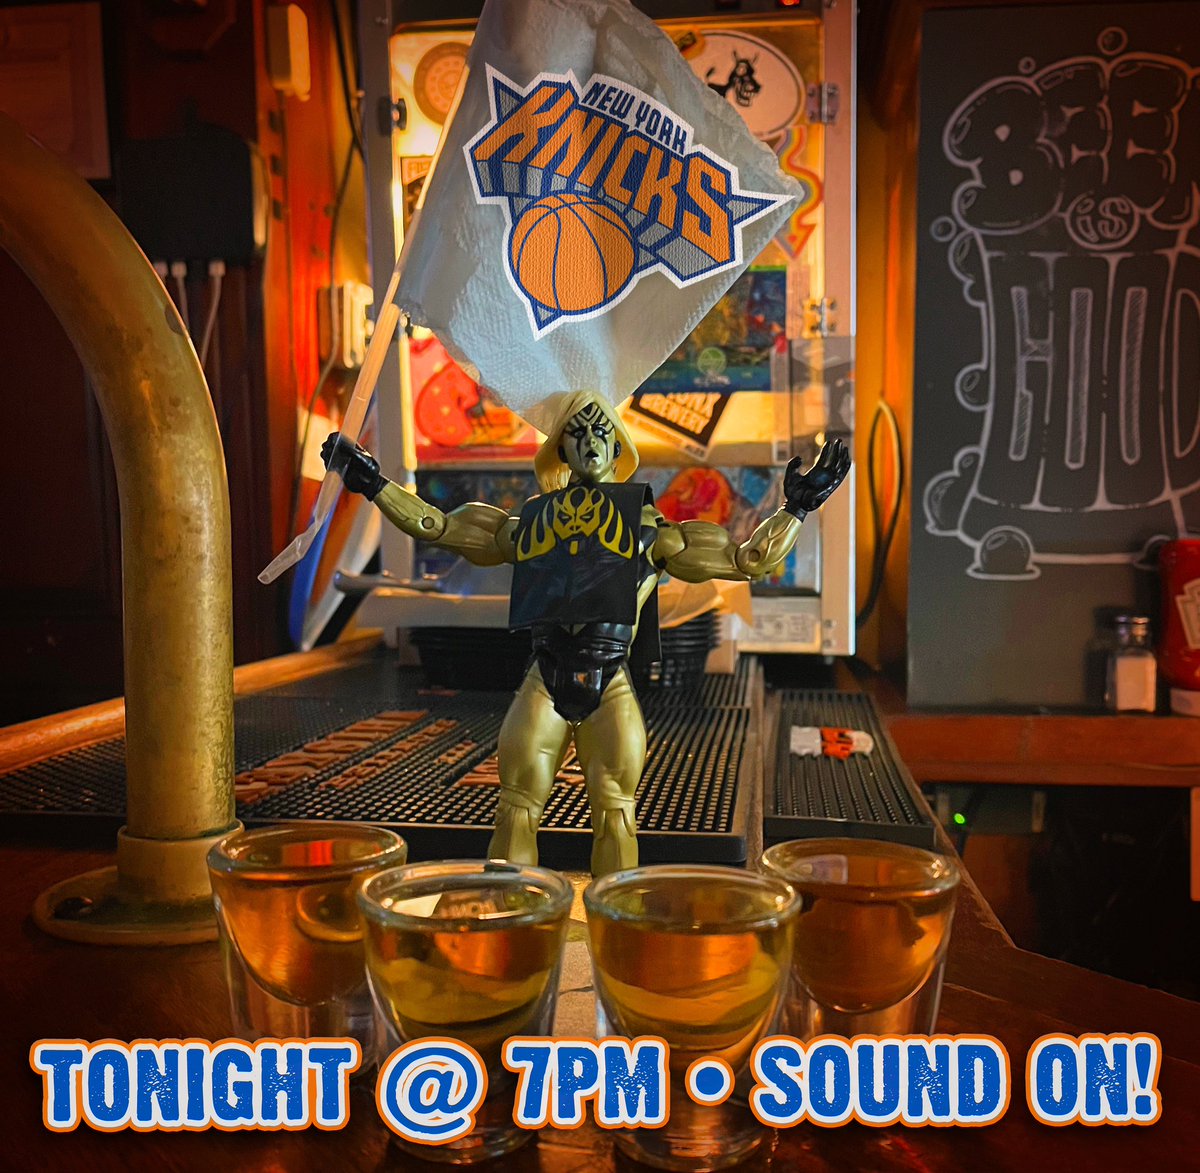 Join us for #HappyHour & stay for the Knicks 🏀 Be sure to grab some 🌮🌮🌮 too cause it's #TacoTuesday and that means 20% OFF (in-house)! #comeandgetit #georgekeeley #gknyc #beerisgood #drinkgoodbeer #shutupanddrink #drinkamongstfriends #uwsnyc #publife  #neighborhoodbar #tacos